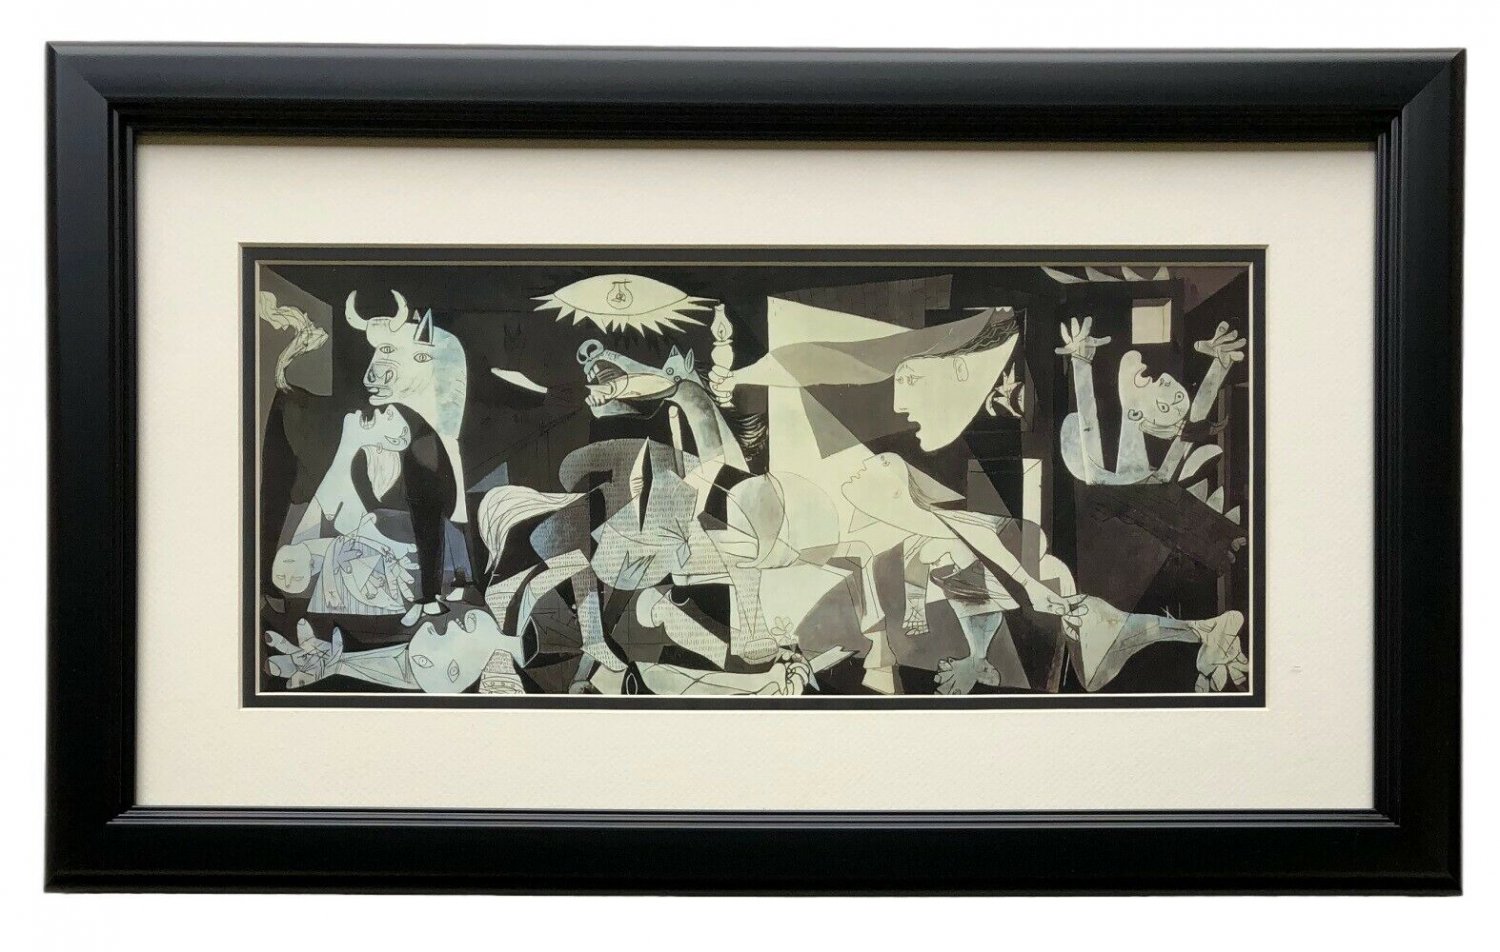 Guernica by Pablo Picasso Framed 23x13 High Quality Photo Print